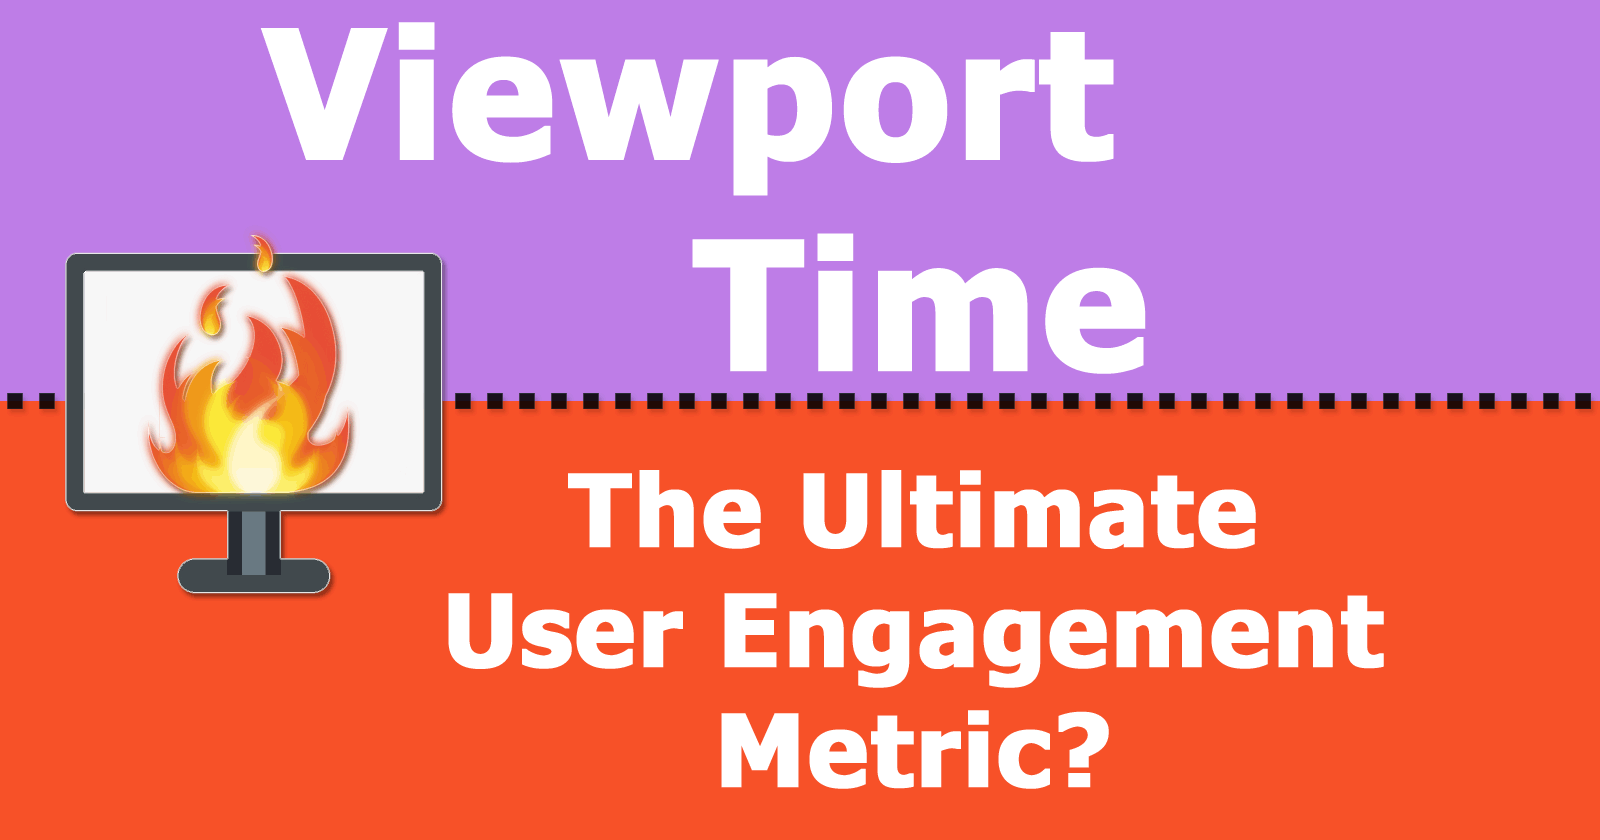 Viewport Time - The Ultimate User Engagement Metric?